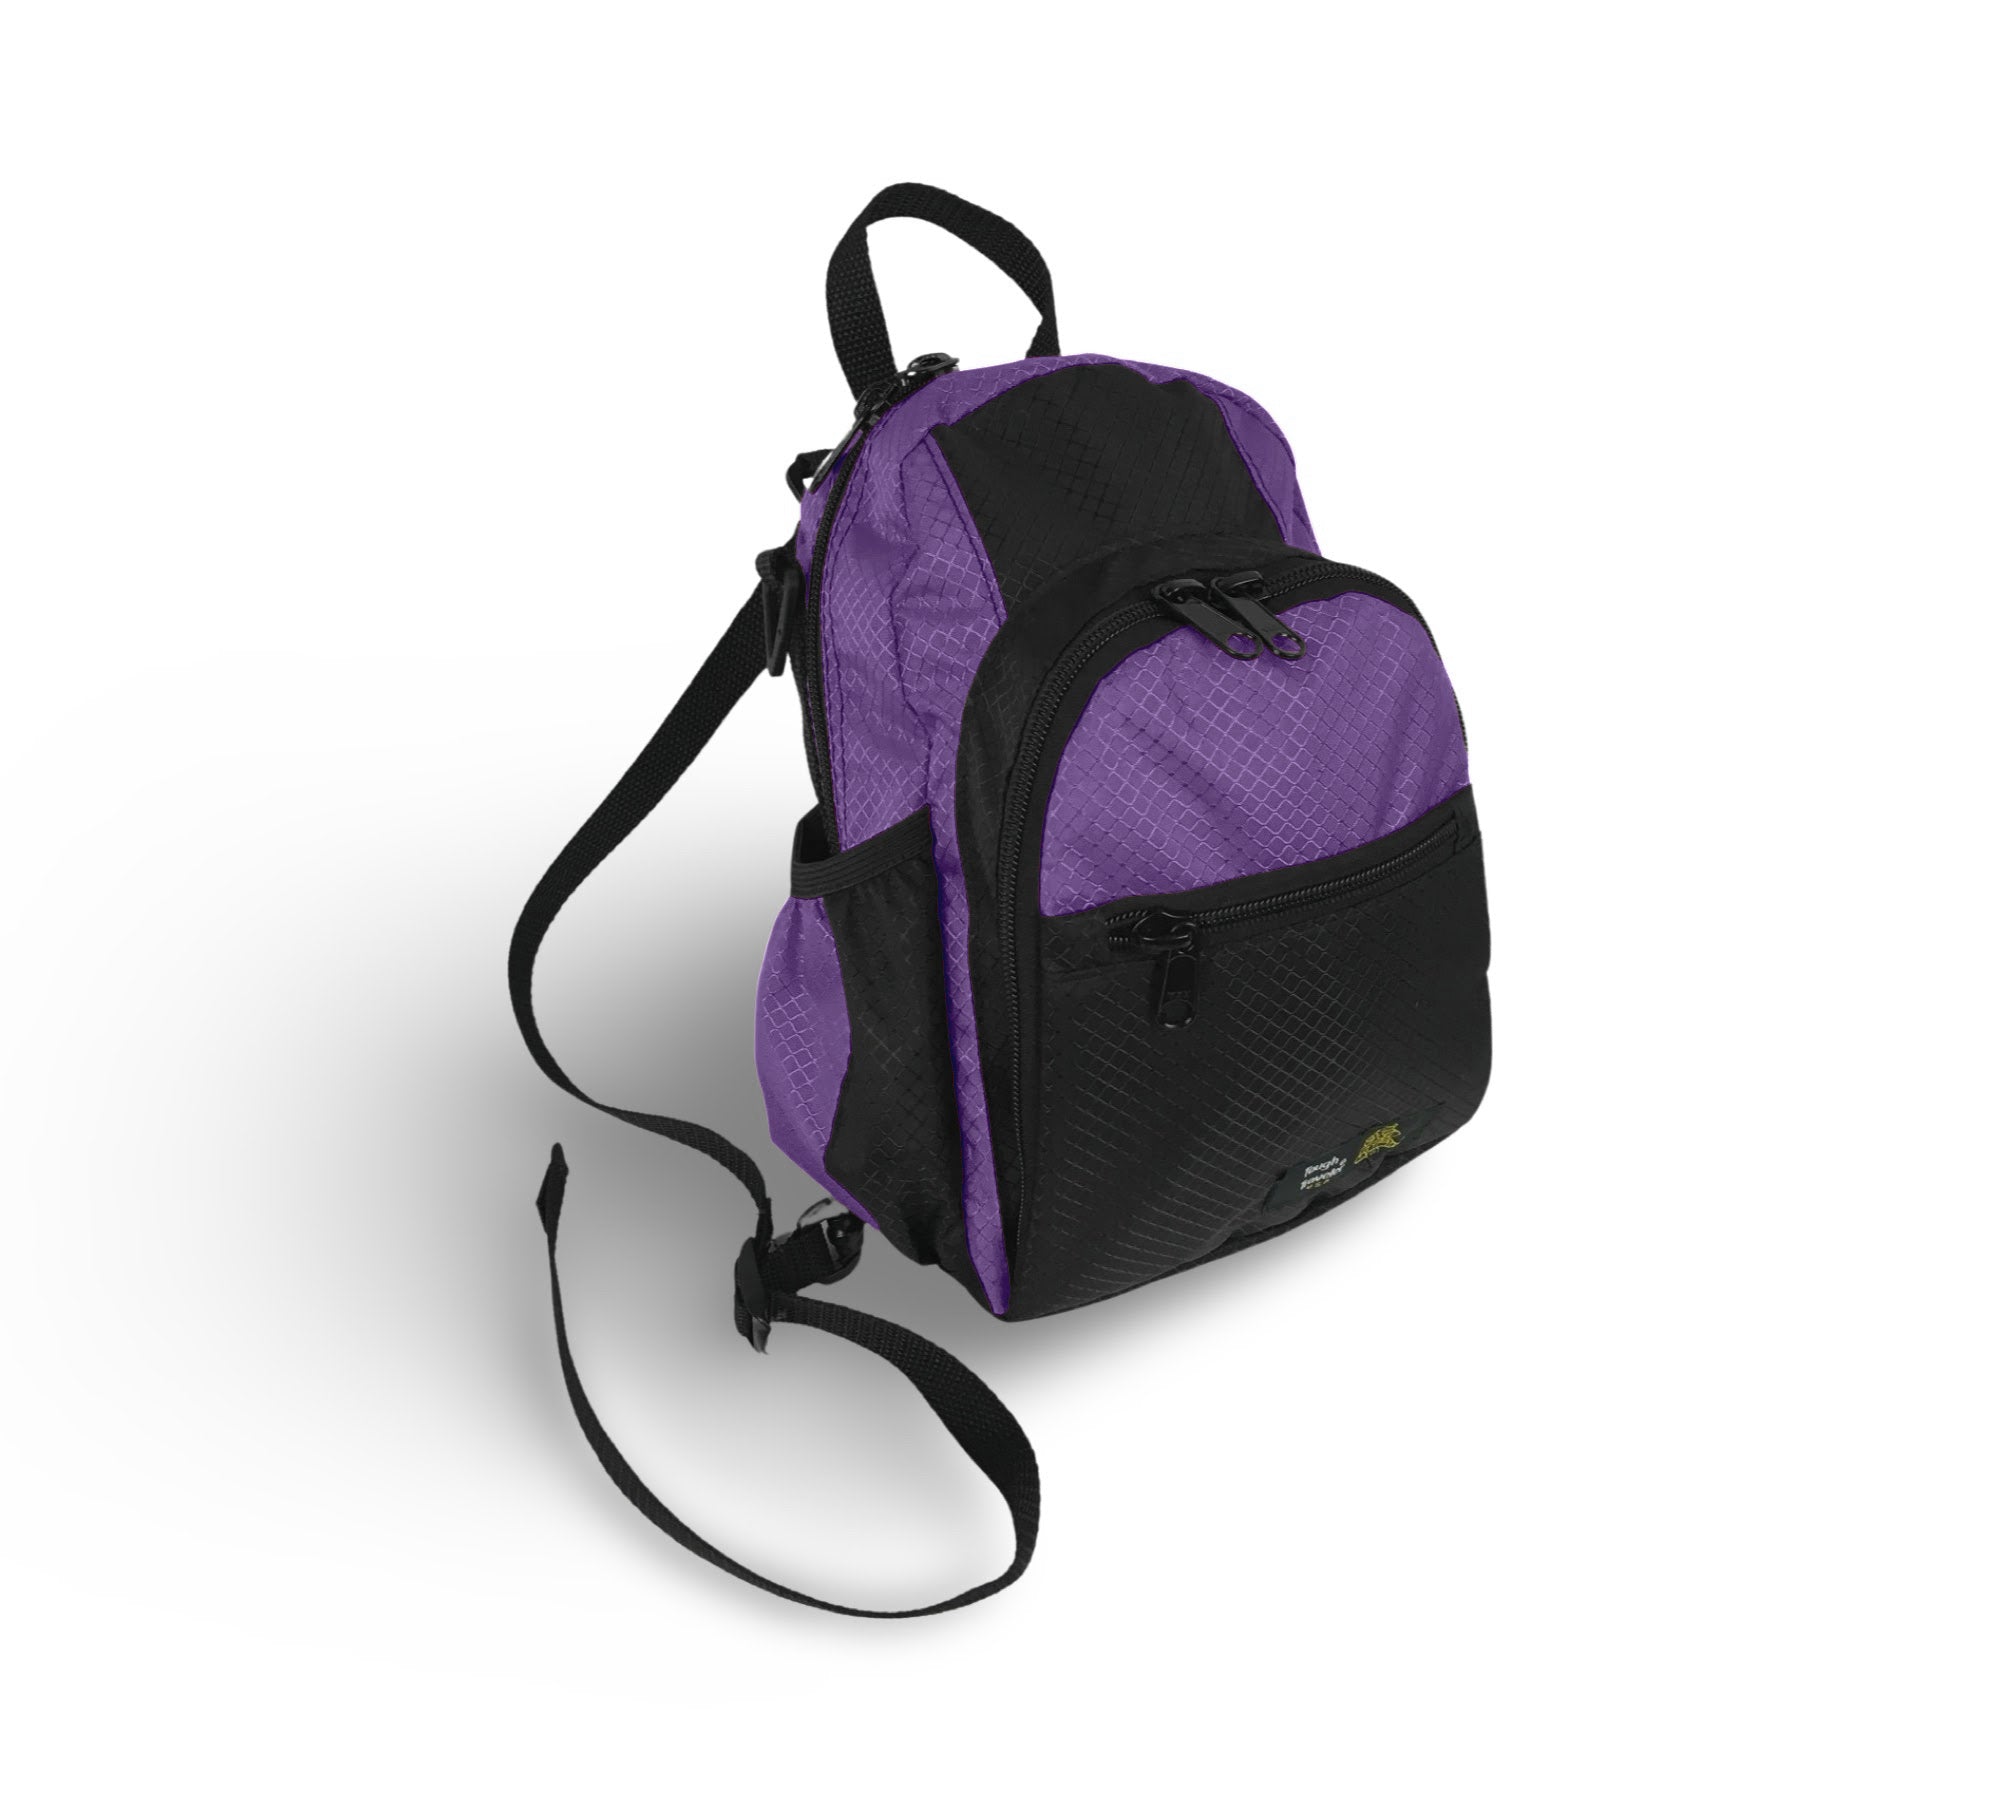 Backpack Q-1120 - Women's Bags from €9.90! bagtobag.com.gr